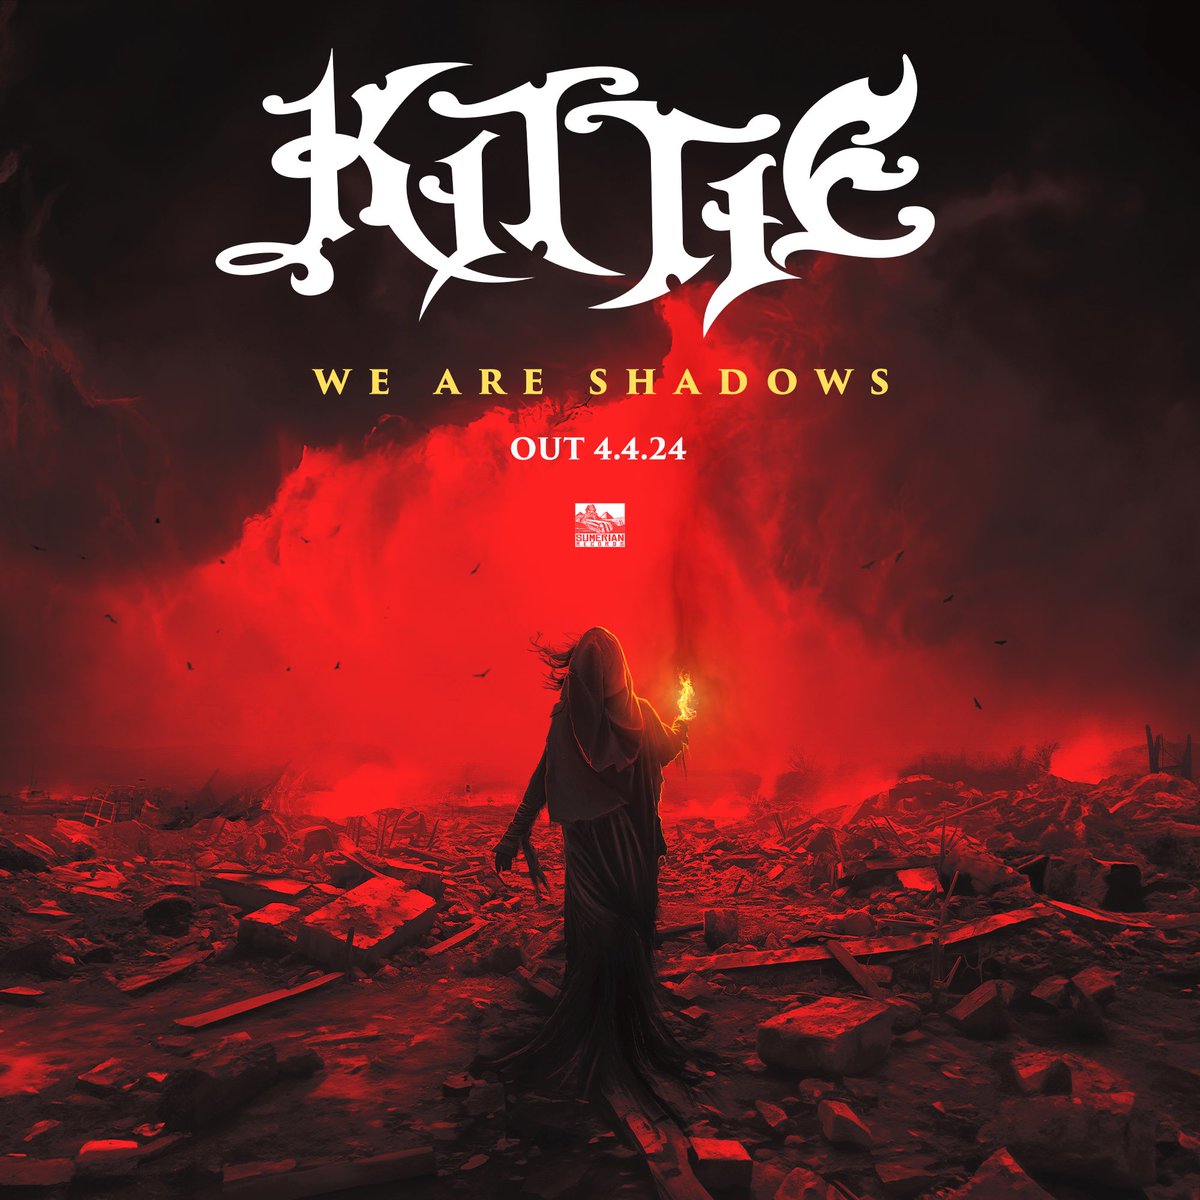 @OFFICIALKITTIE returns with new single ‘We Are Shadows’ TOMORROW! 🔥🖤 Watch the video 4/4 at 11:00 AM ET on @SumerianRecords YouTube channel. Pre save with the link below! sumerian.lnk.to/shadows